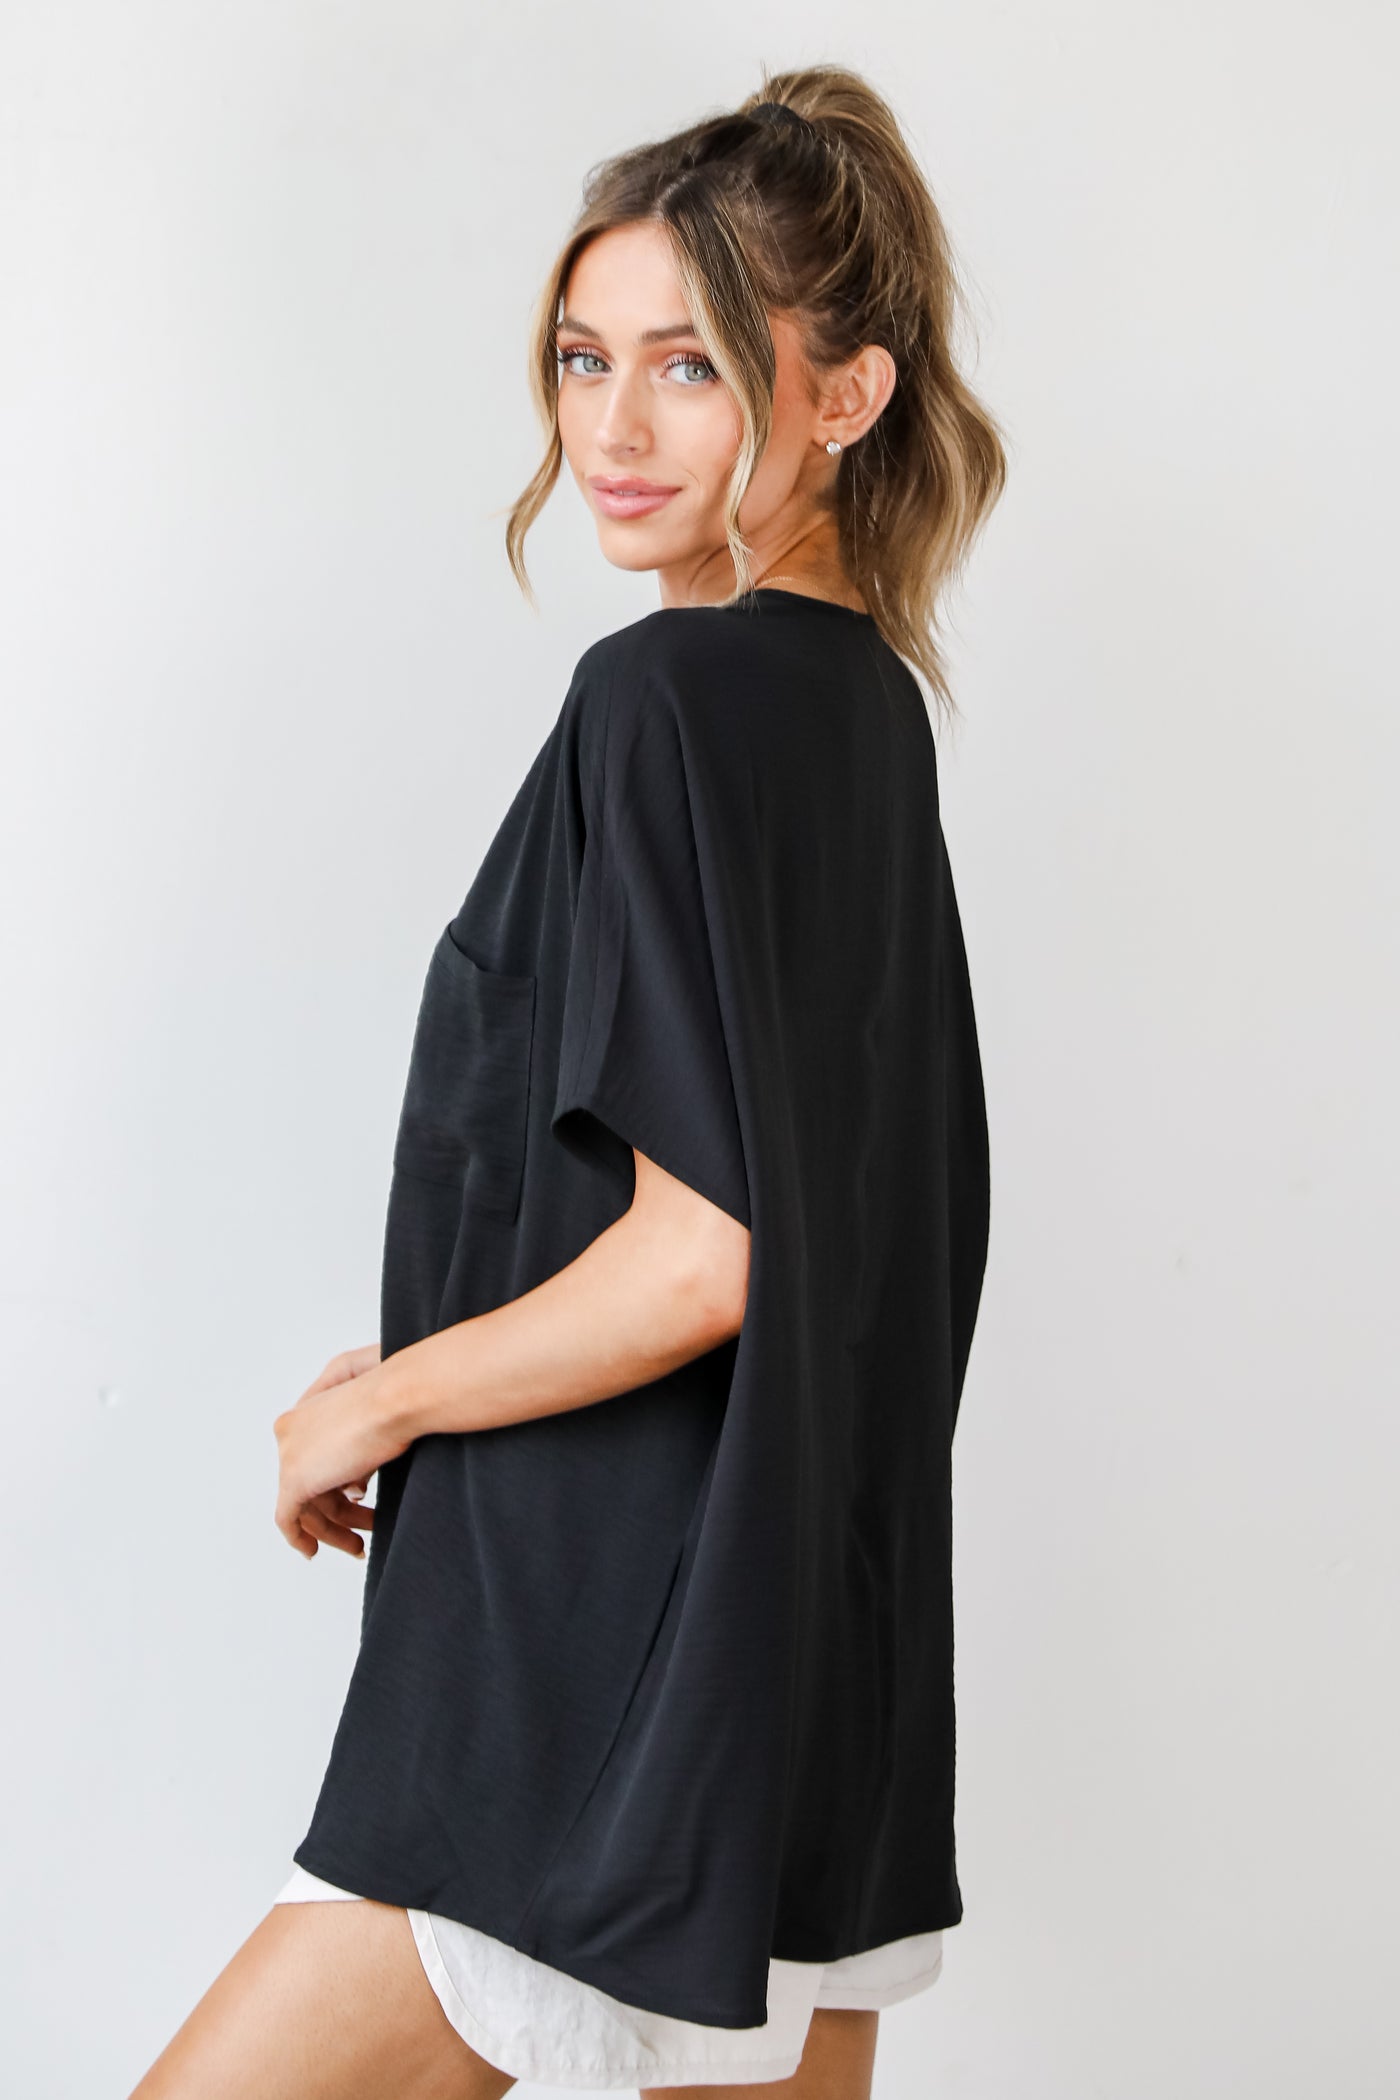 black oversized Blouse side view